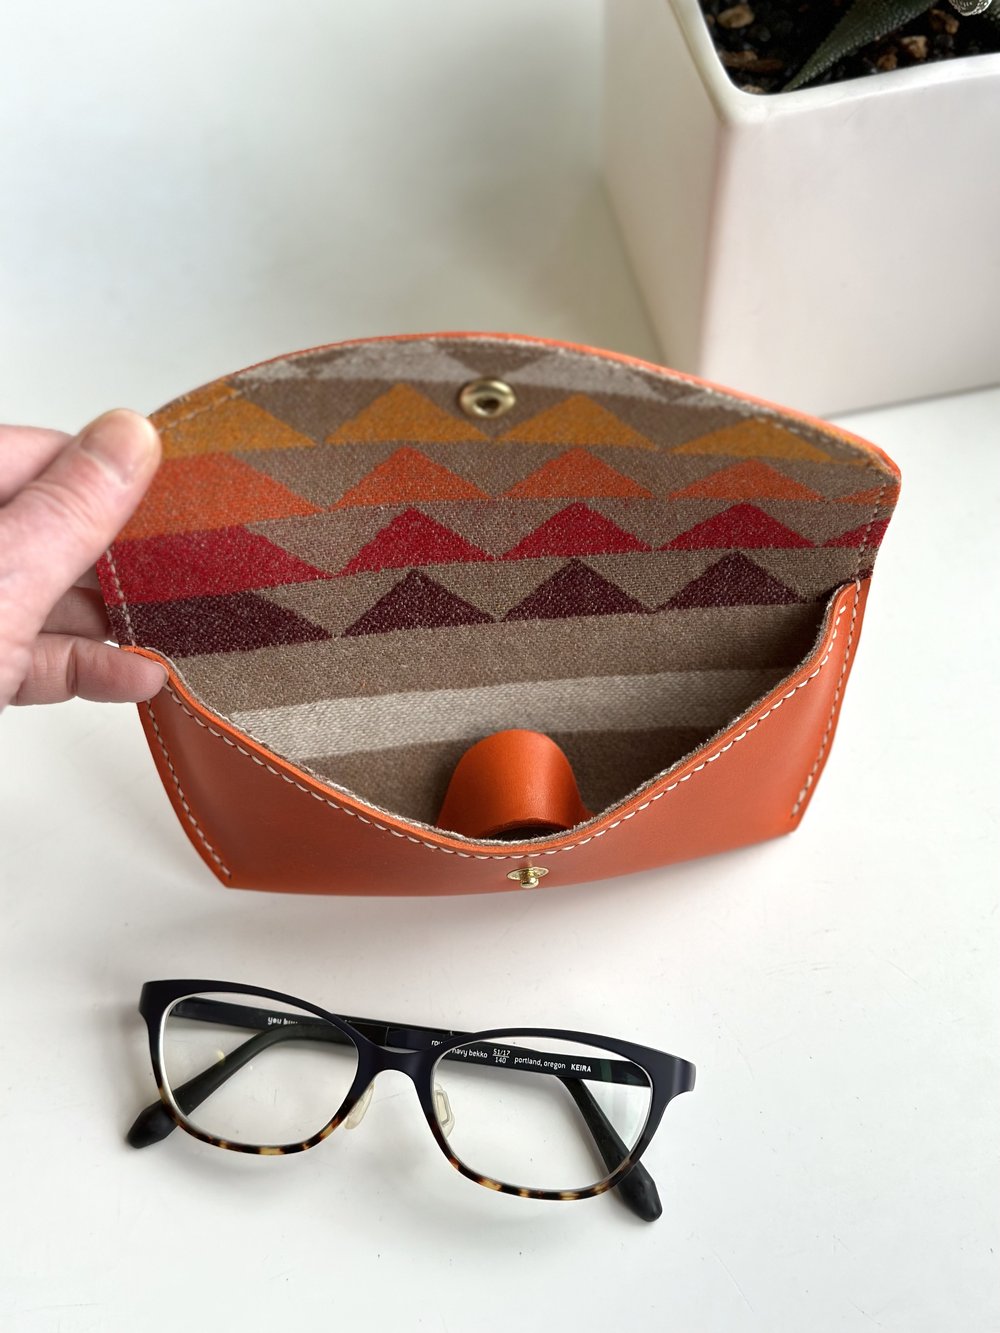 Laikipia Clutch in soft Suede – Large